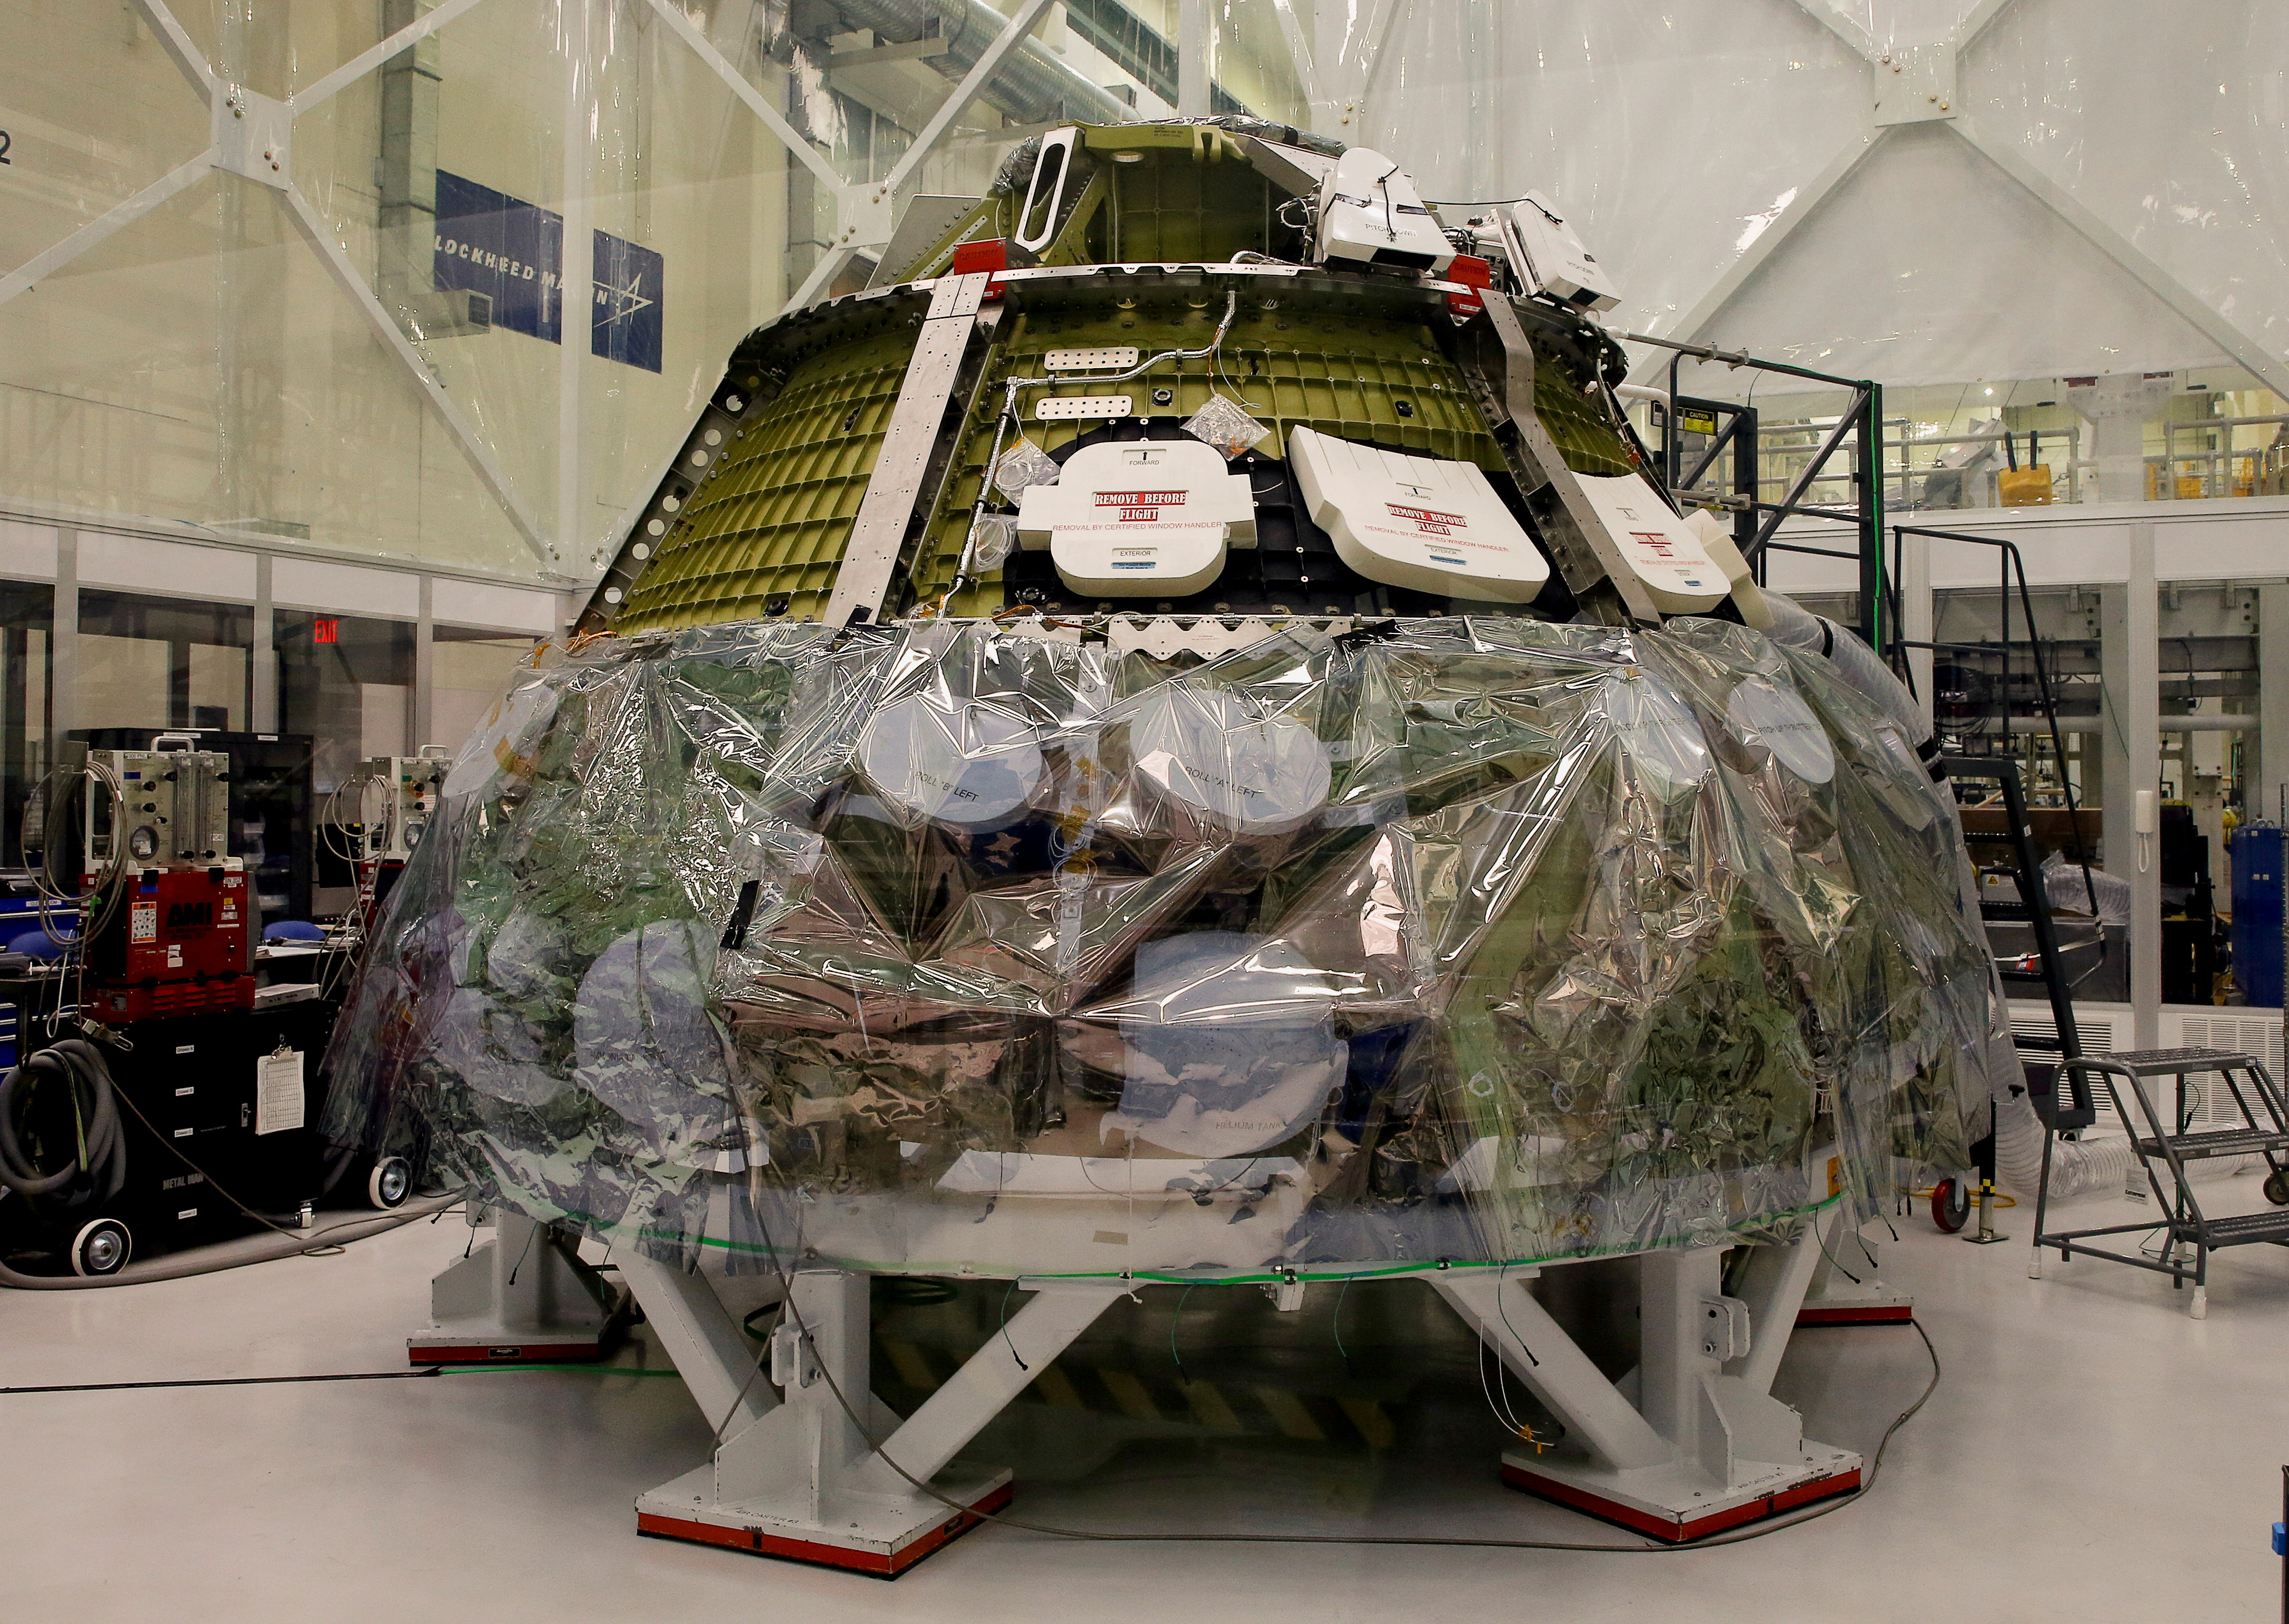 The NASA Artemis program moon rocket's Orion crew capsule is shown during a media event